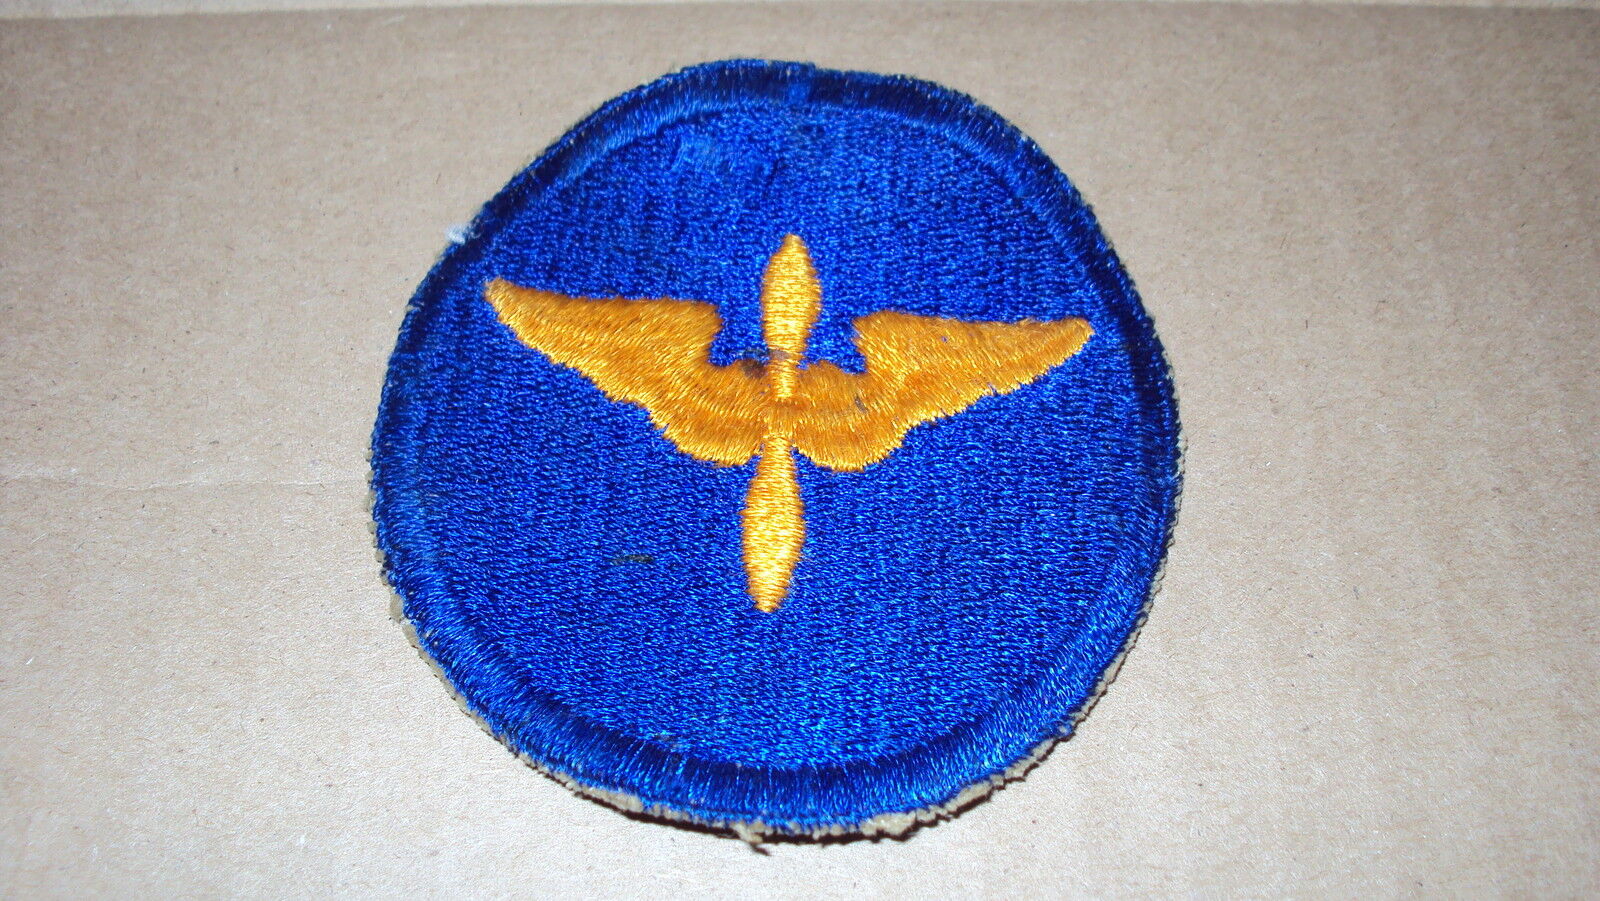 Gold wing and propeller AIR corps US ARMY PATCH vintage military motorcycle